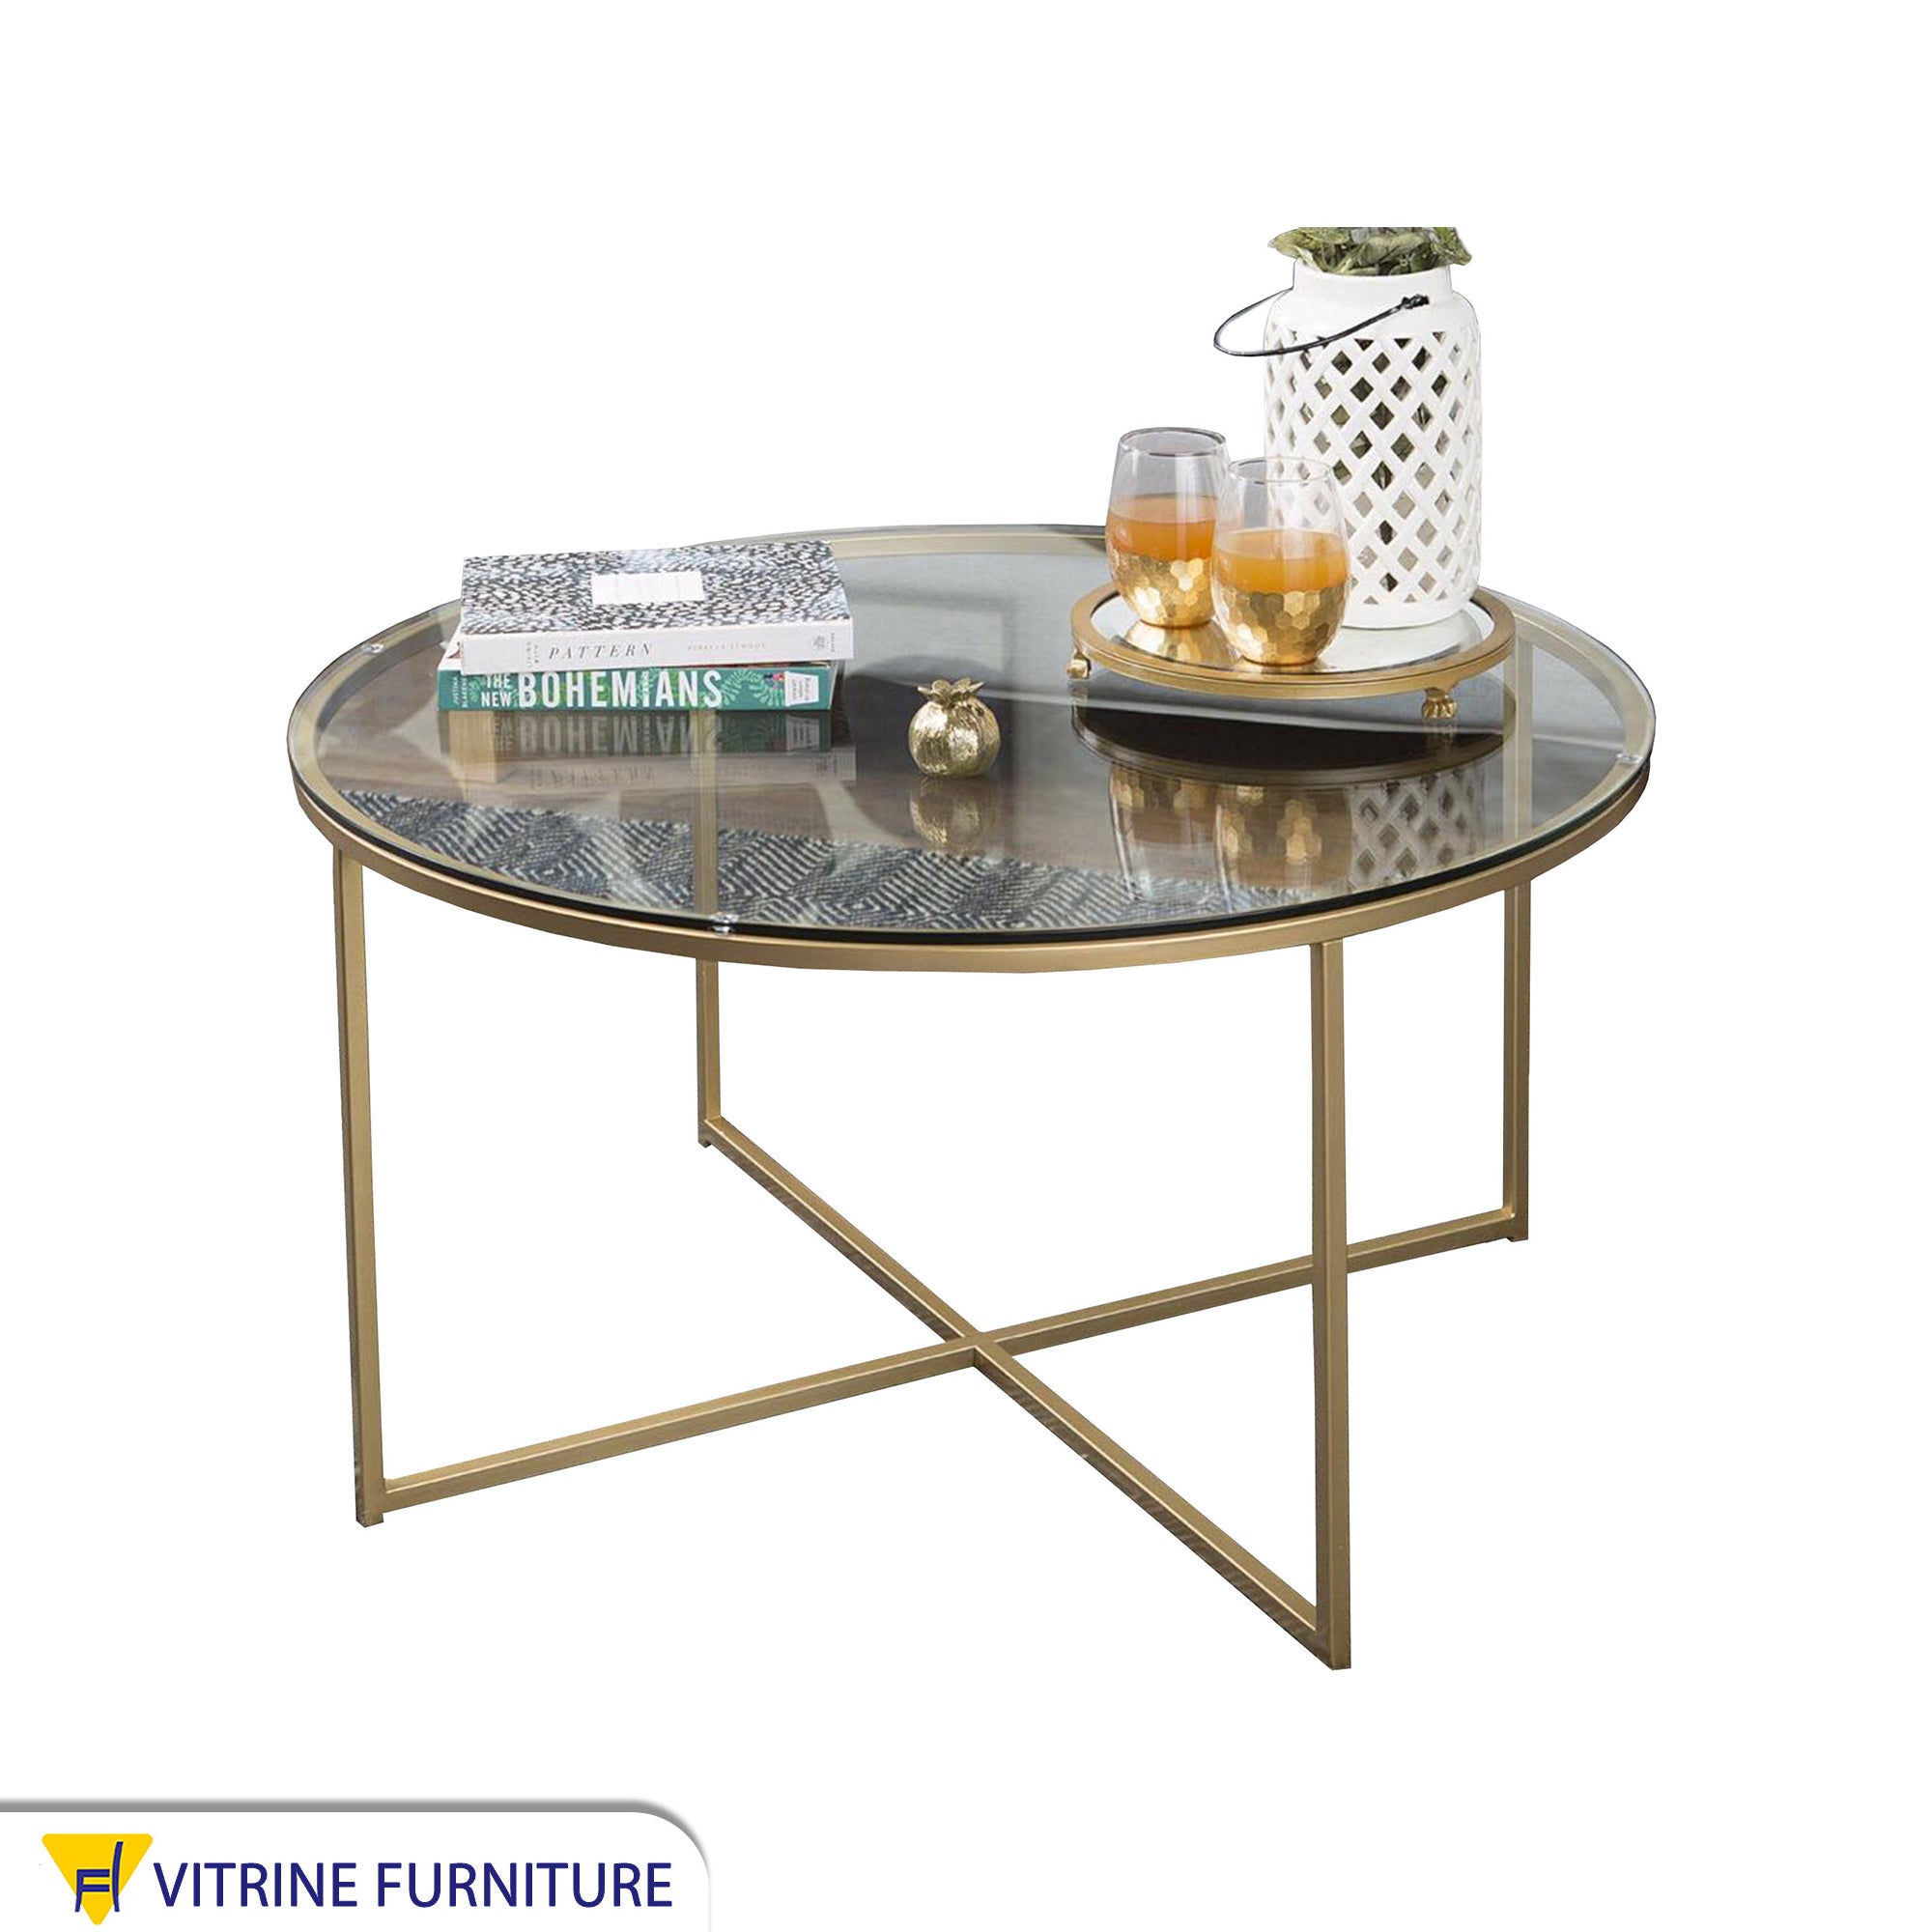 Circular table with a gold x-shaped base